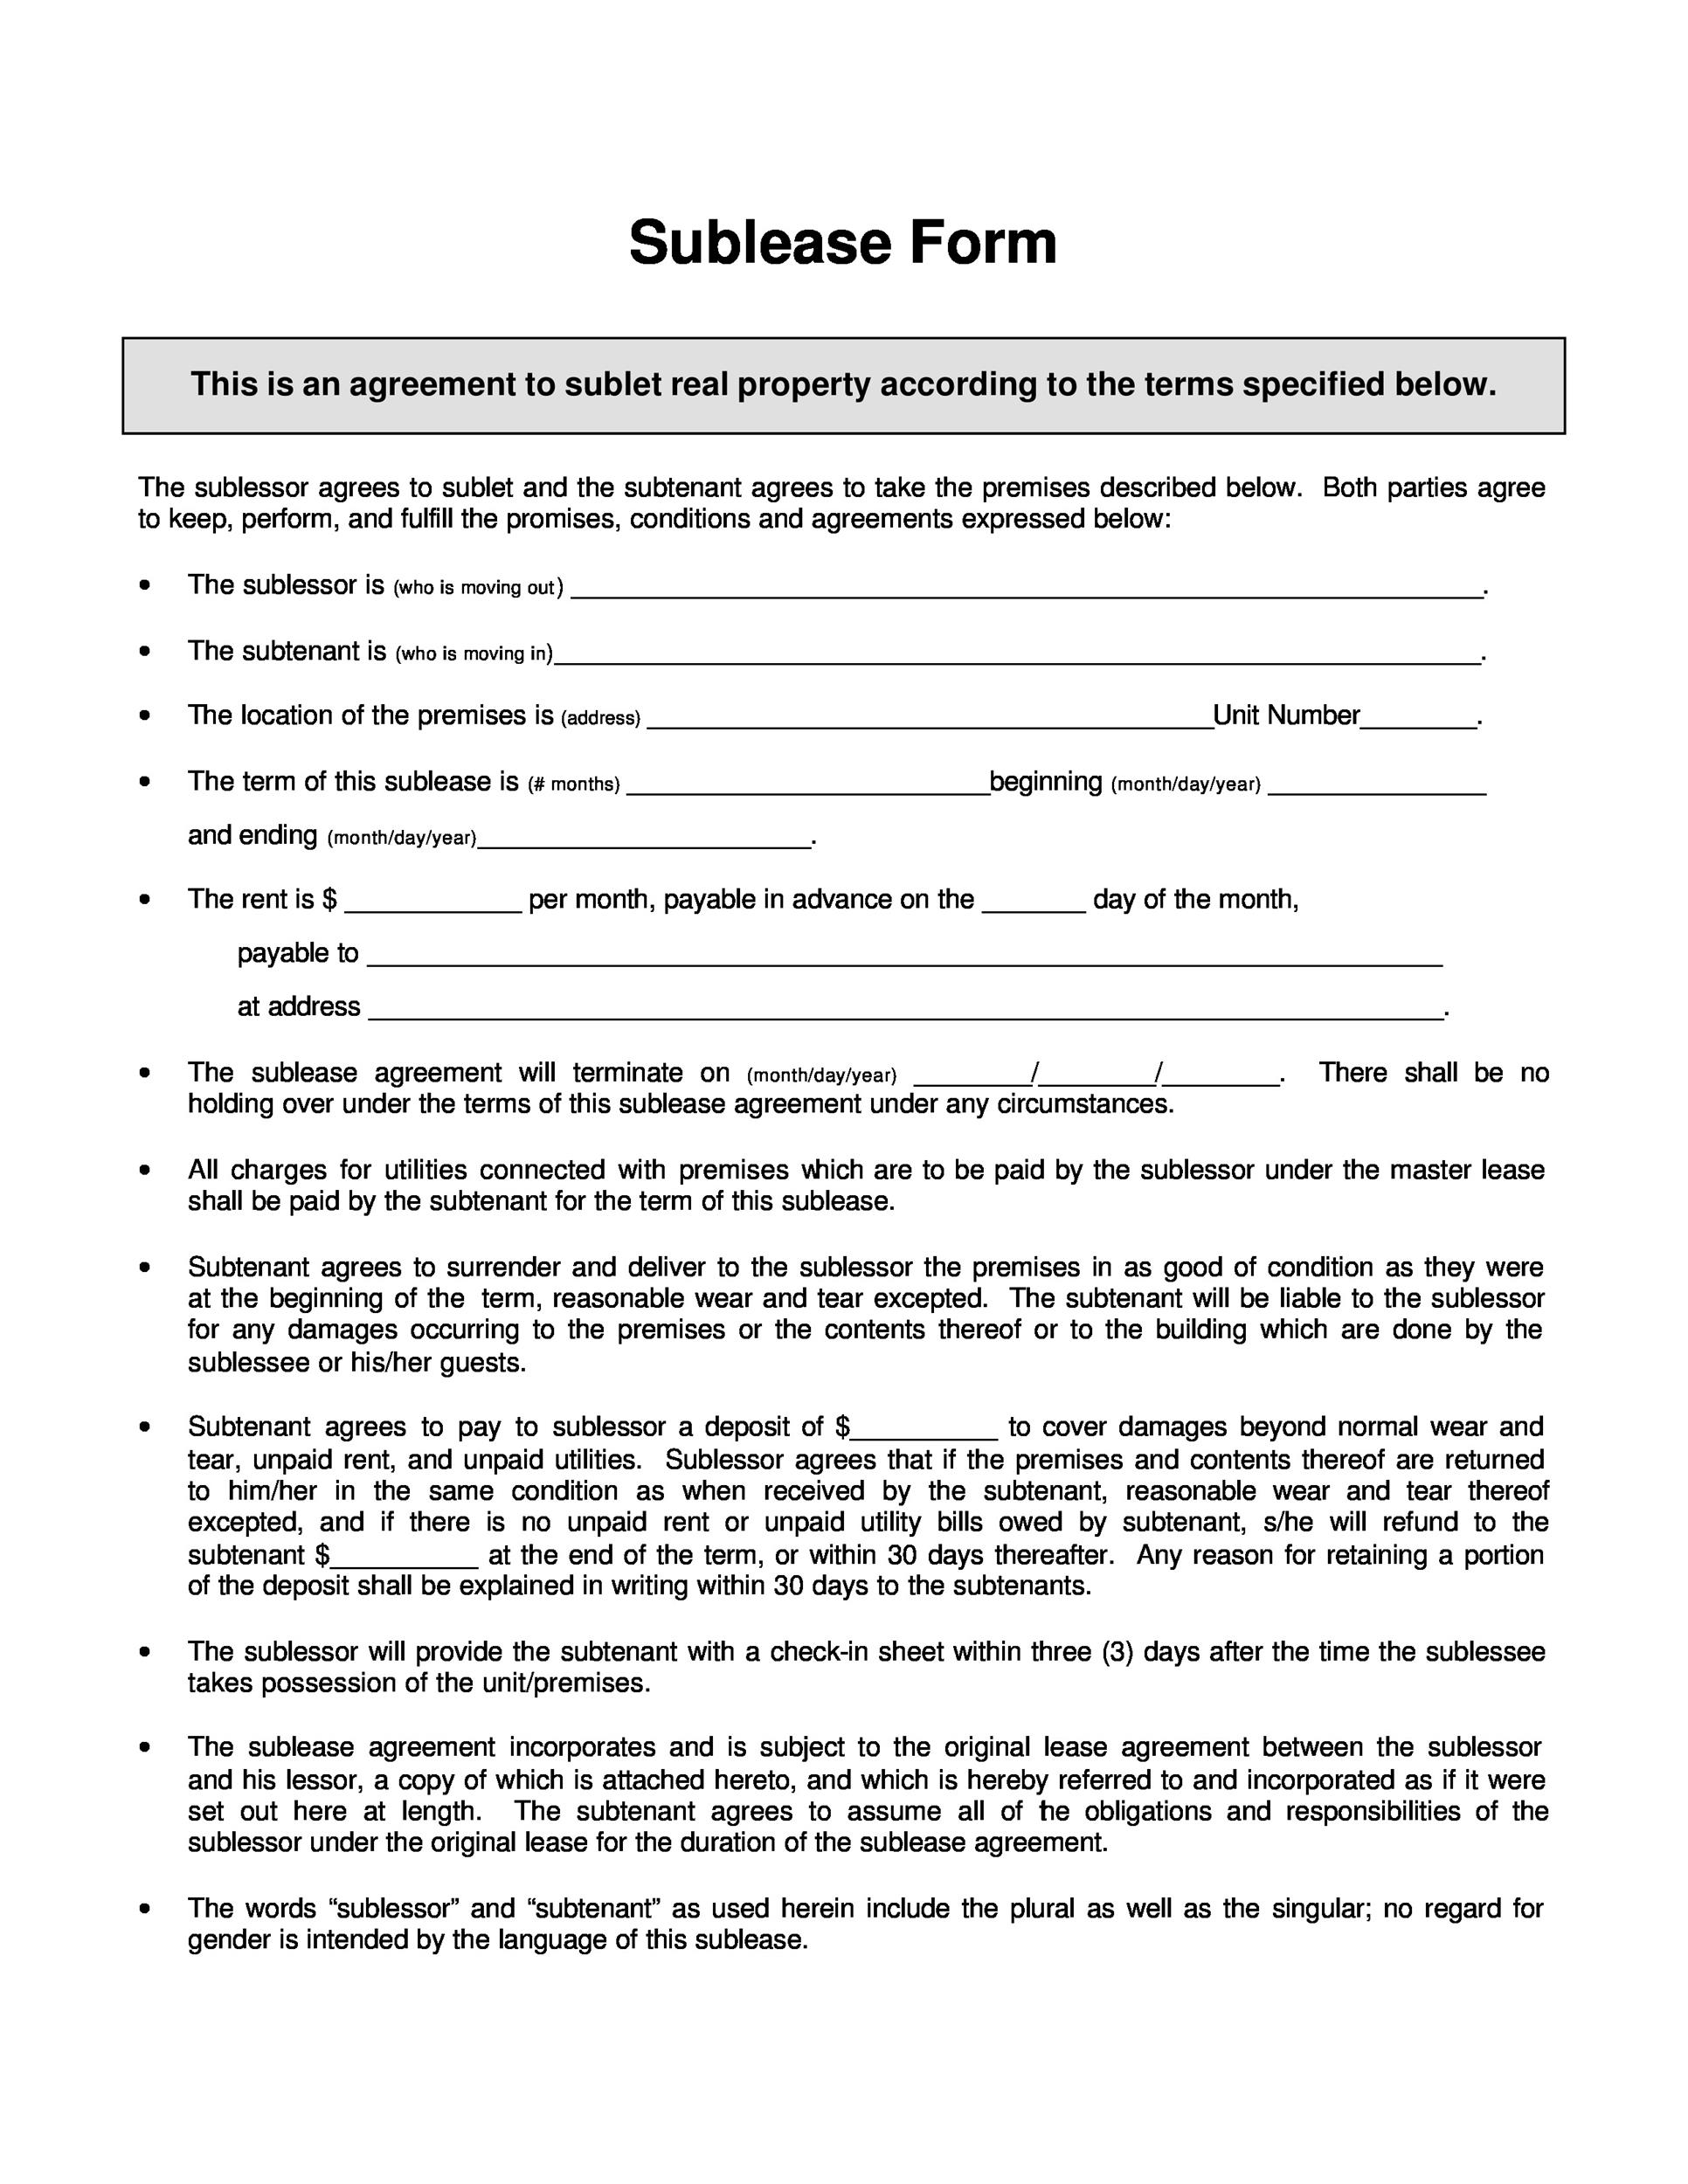 40  Professional Sublease Agreement Templates \u0026 Forms  Template Lab